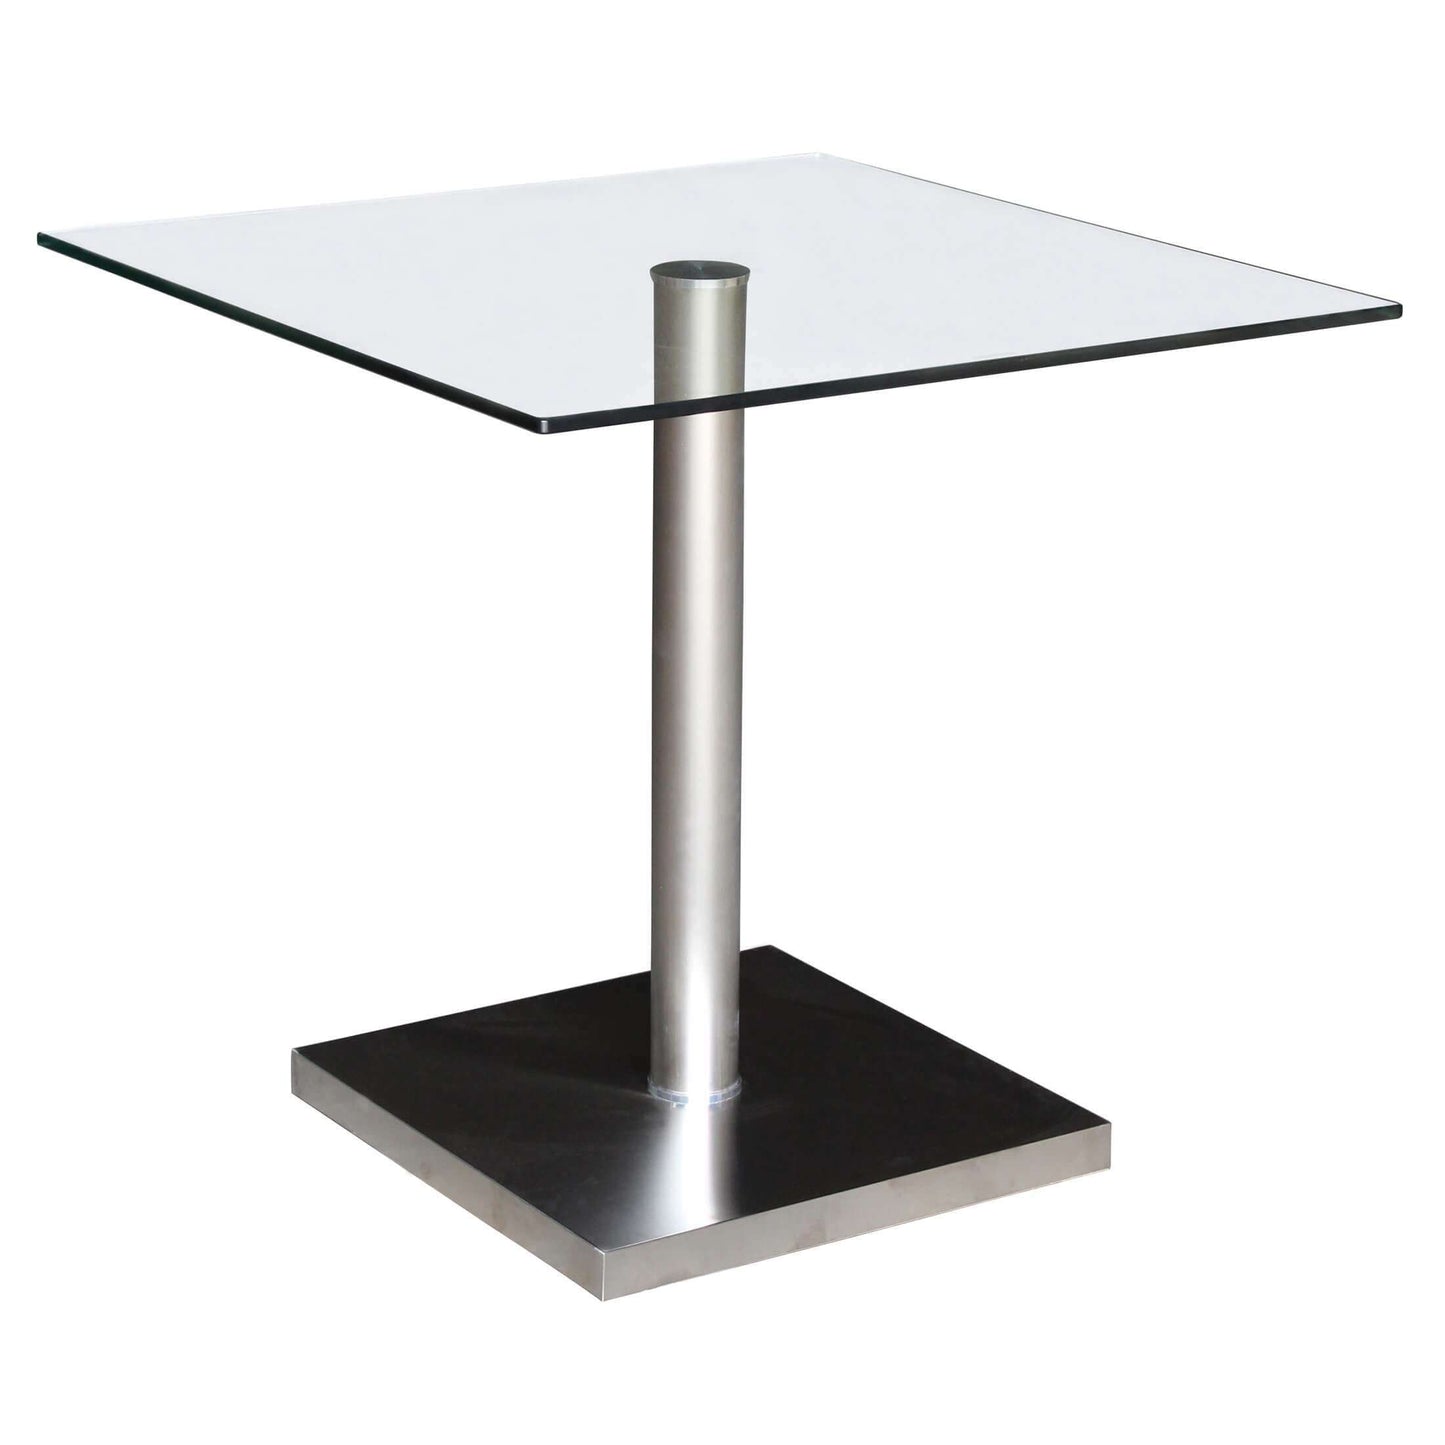 Ashpinoke:Lucas (Havana) Glass Dining Table Stainless Steel & Clear,Dining Tables,Heartlands Furniture